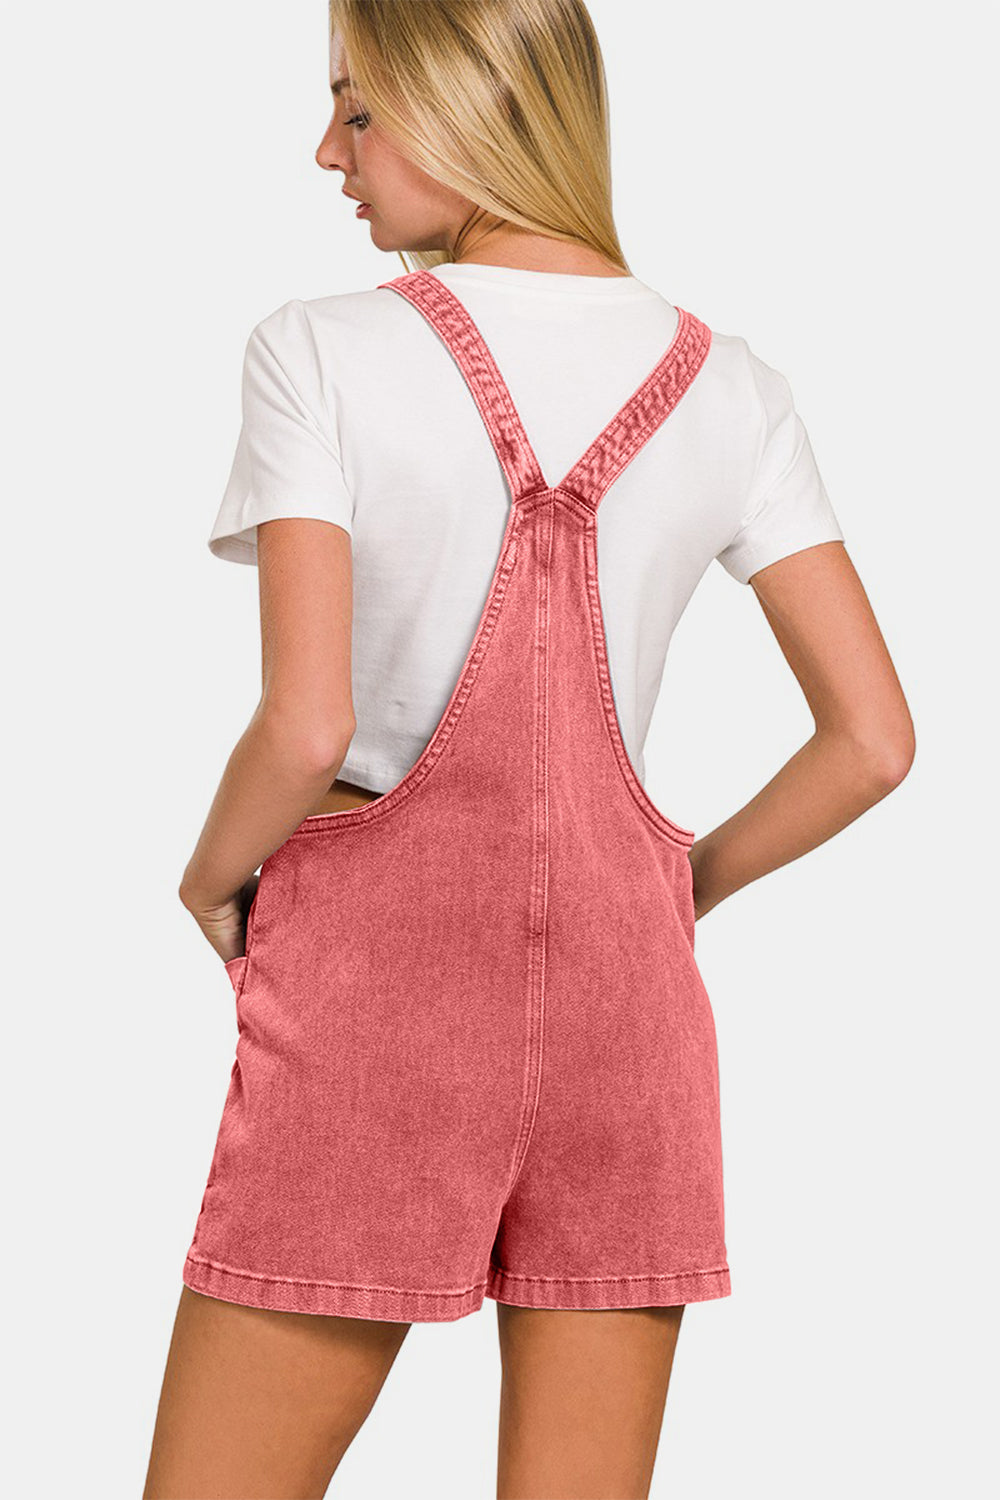 These Washed Knot Strap Rompers are the perfect blend of casual and chic style. The washed fabric gives them a relaxed and lived-in look, while the knot strap detail adds a touch of charm and uniqueness.  S - L